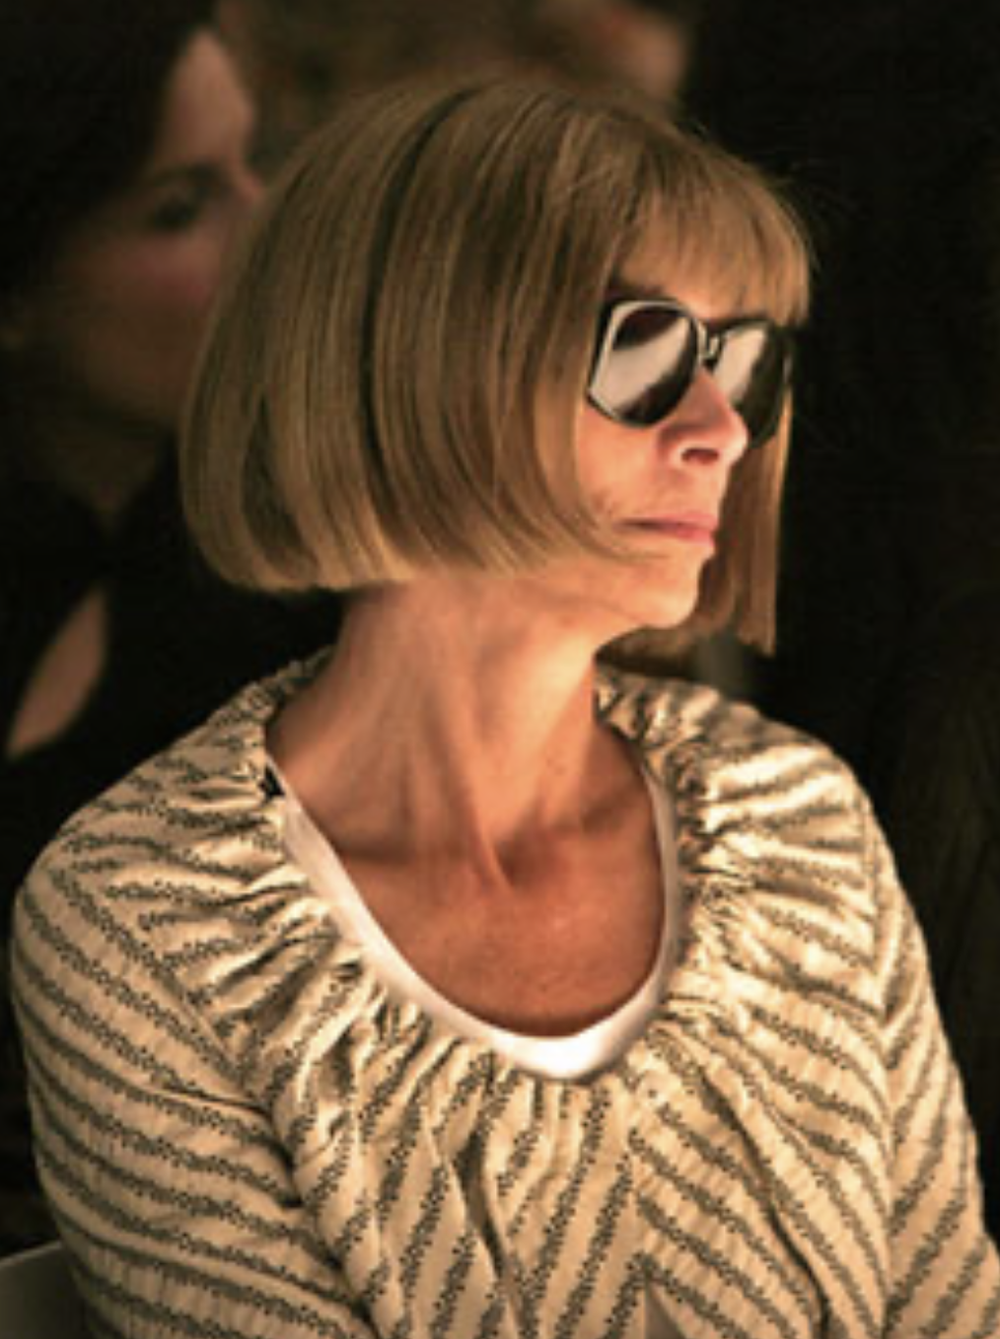   "File:Anna Wintour.jpg"  by Karin Bar is licensed under  CC BY 2.5     